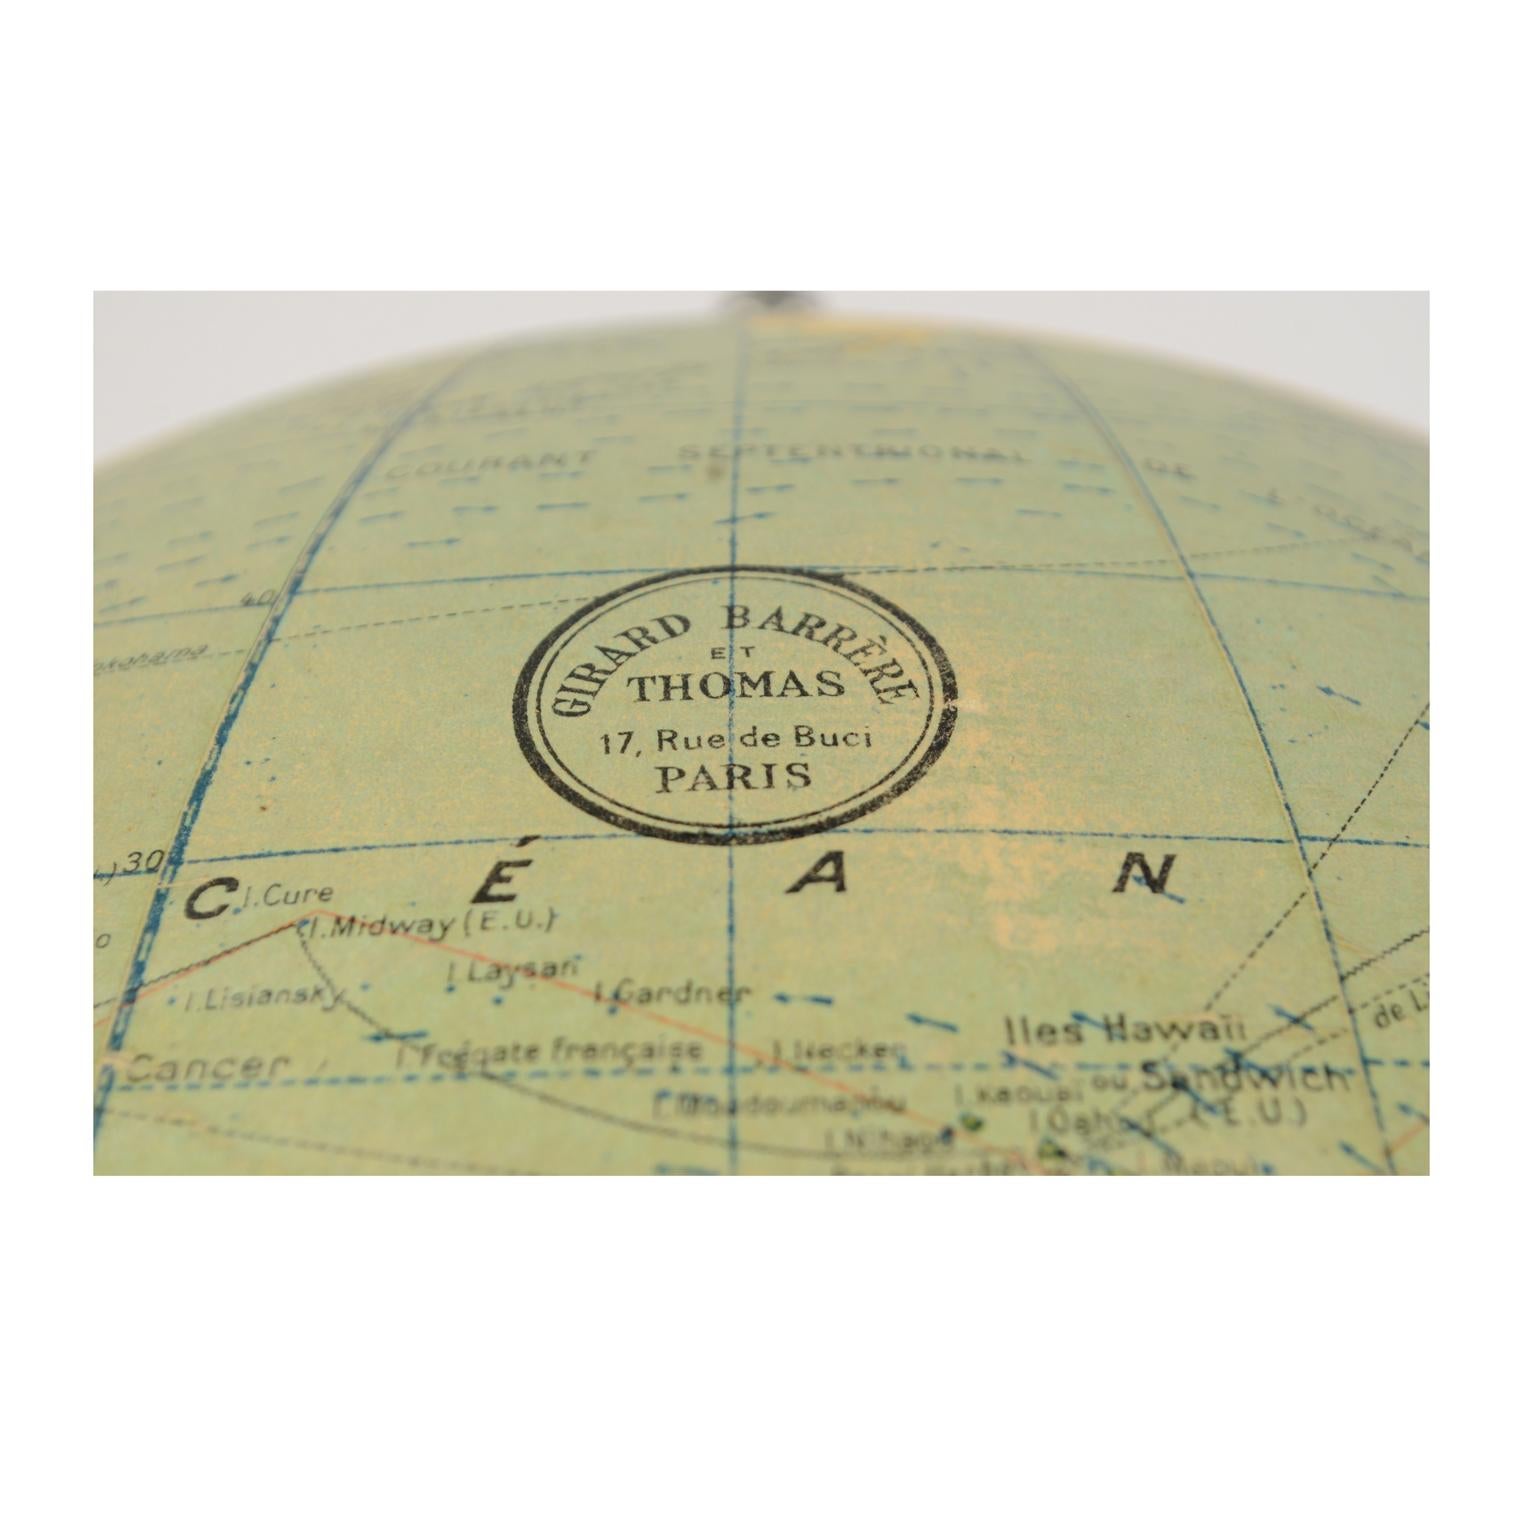 Antique Terrestrial Globe Published in 1940s by Girard Barrère et Thomas, Paris For Sale 2